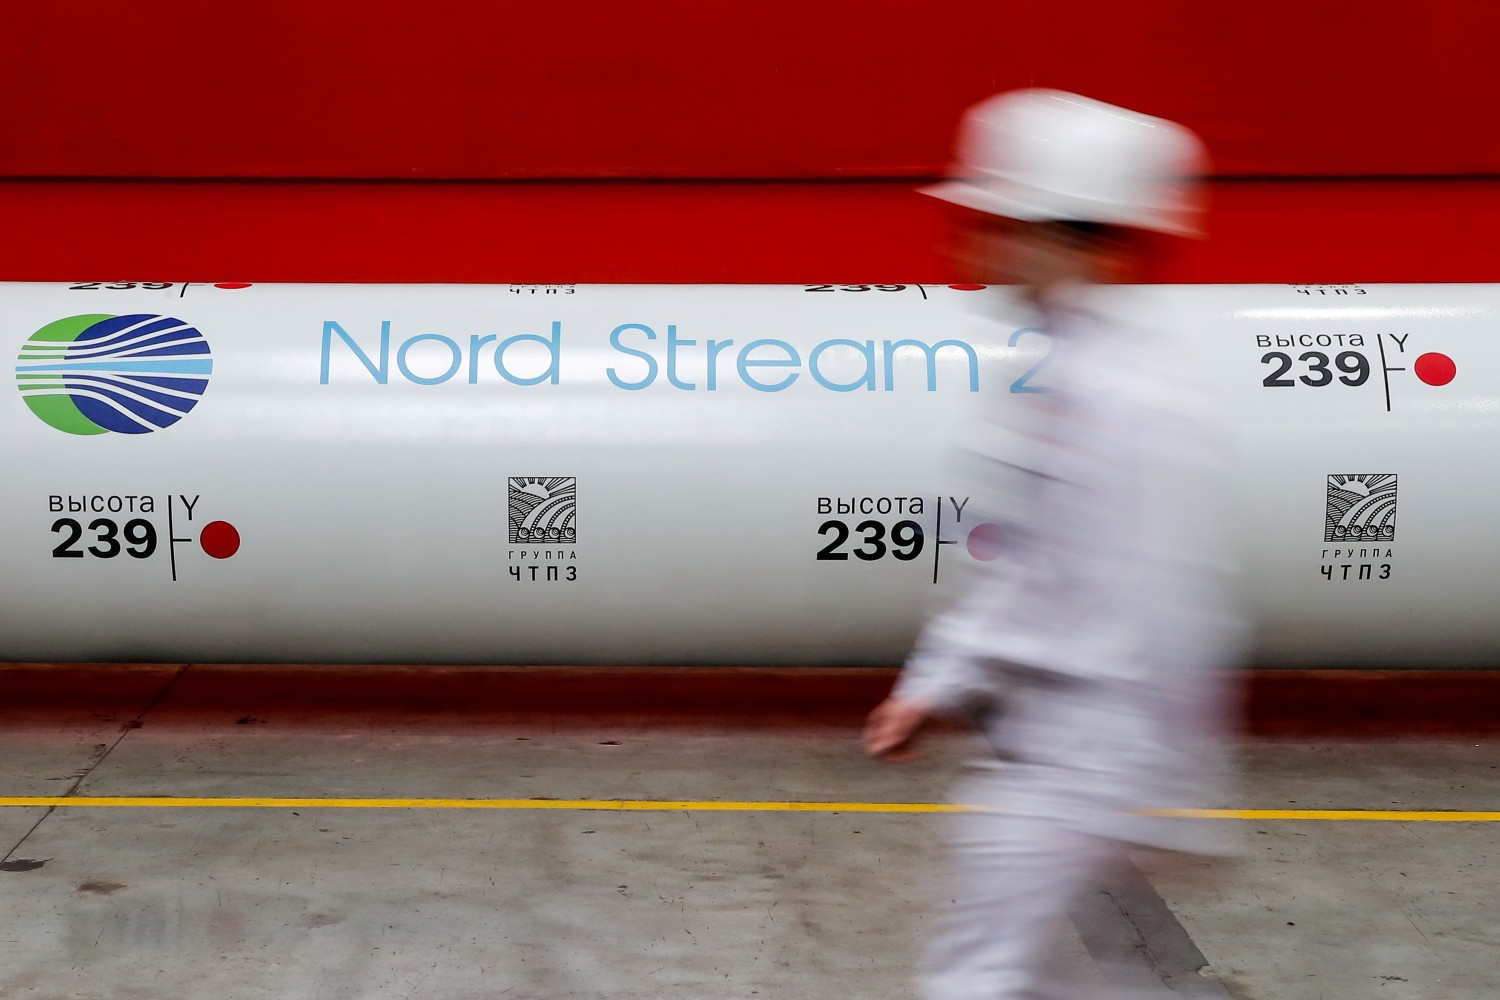 The logo of the Nord Stream 2 gas pipeline project is seen on a pipe at the Chelyabinsk pipe rolling plant in Chelyabinsk, Russia, February 26, 2020. Reuters/Maxim Shemetov/File Photo